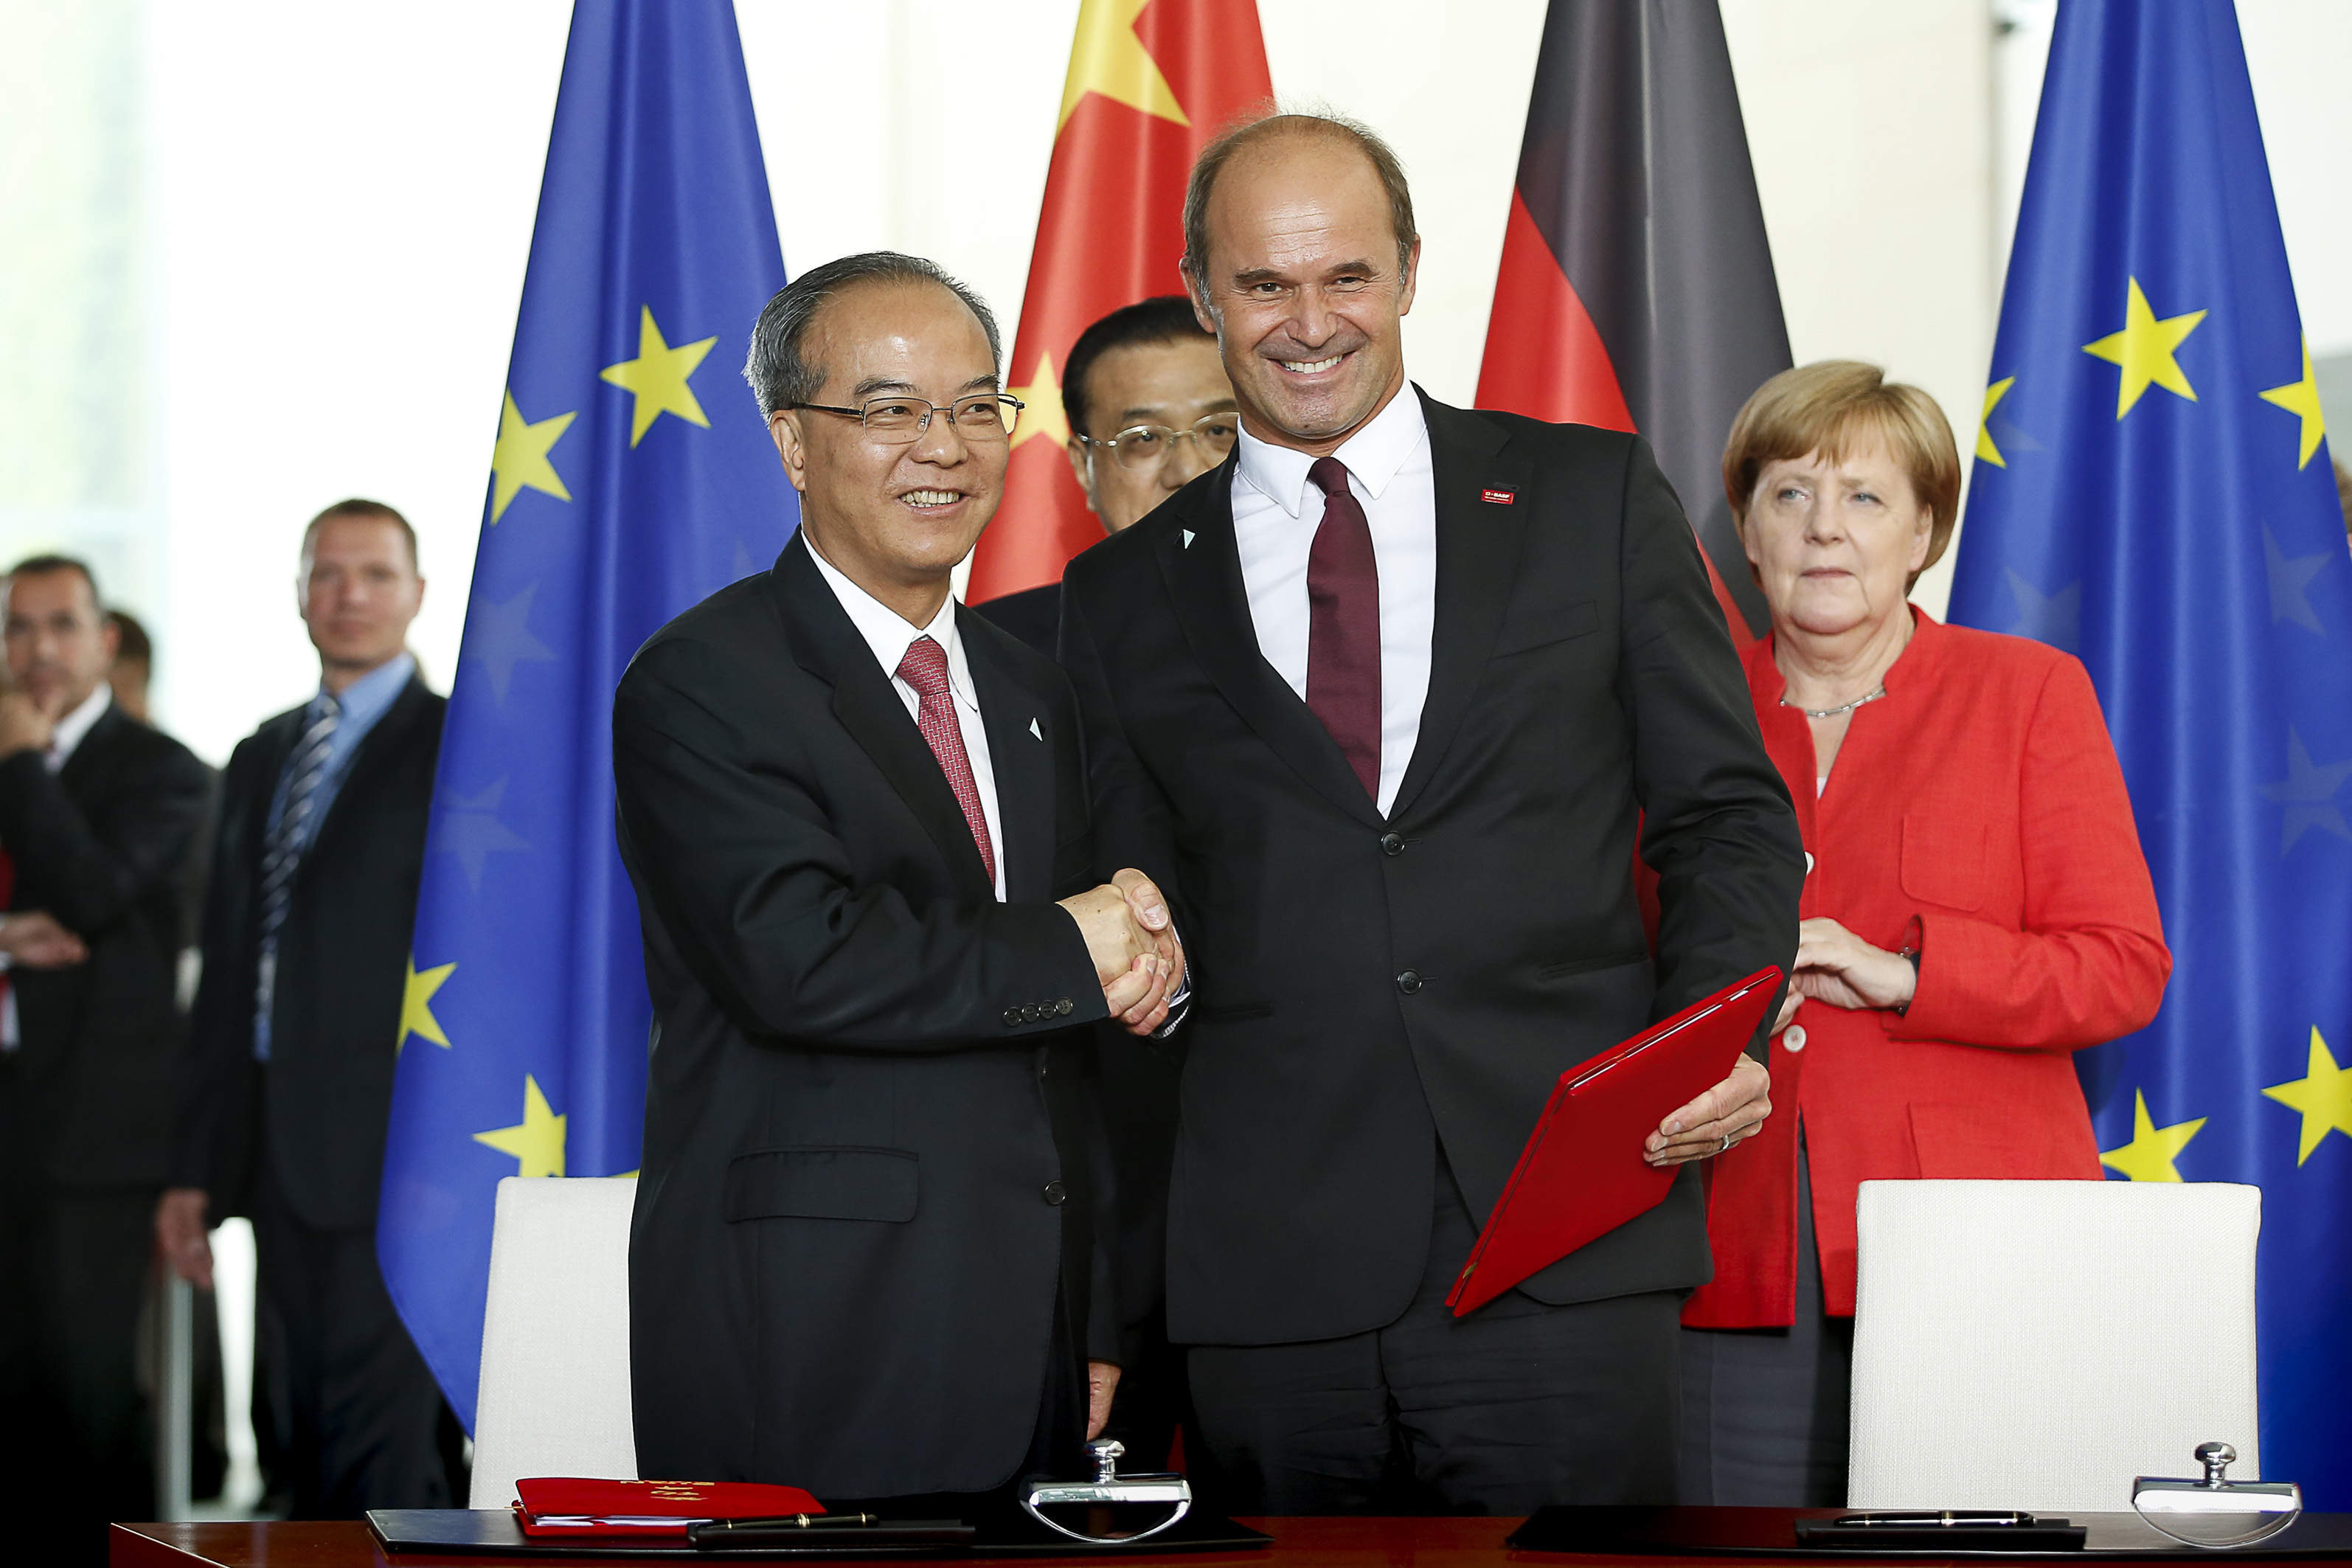 Signing of the MoU in Berlin in the presence of Germany’s Chancellor Angela Merkel and the Chinese Premier Li Keqiang: Martin Brudermüller, BASF’s Chairman of the Board of Executive Directors, and Lin Shaochun, Executive Vice Governor of Guangdong Pr